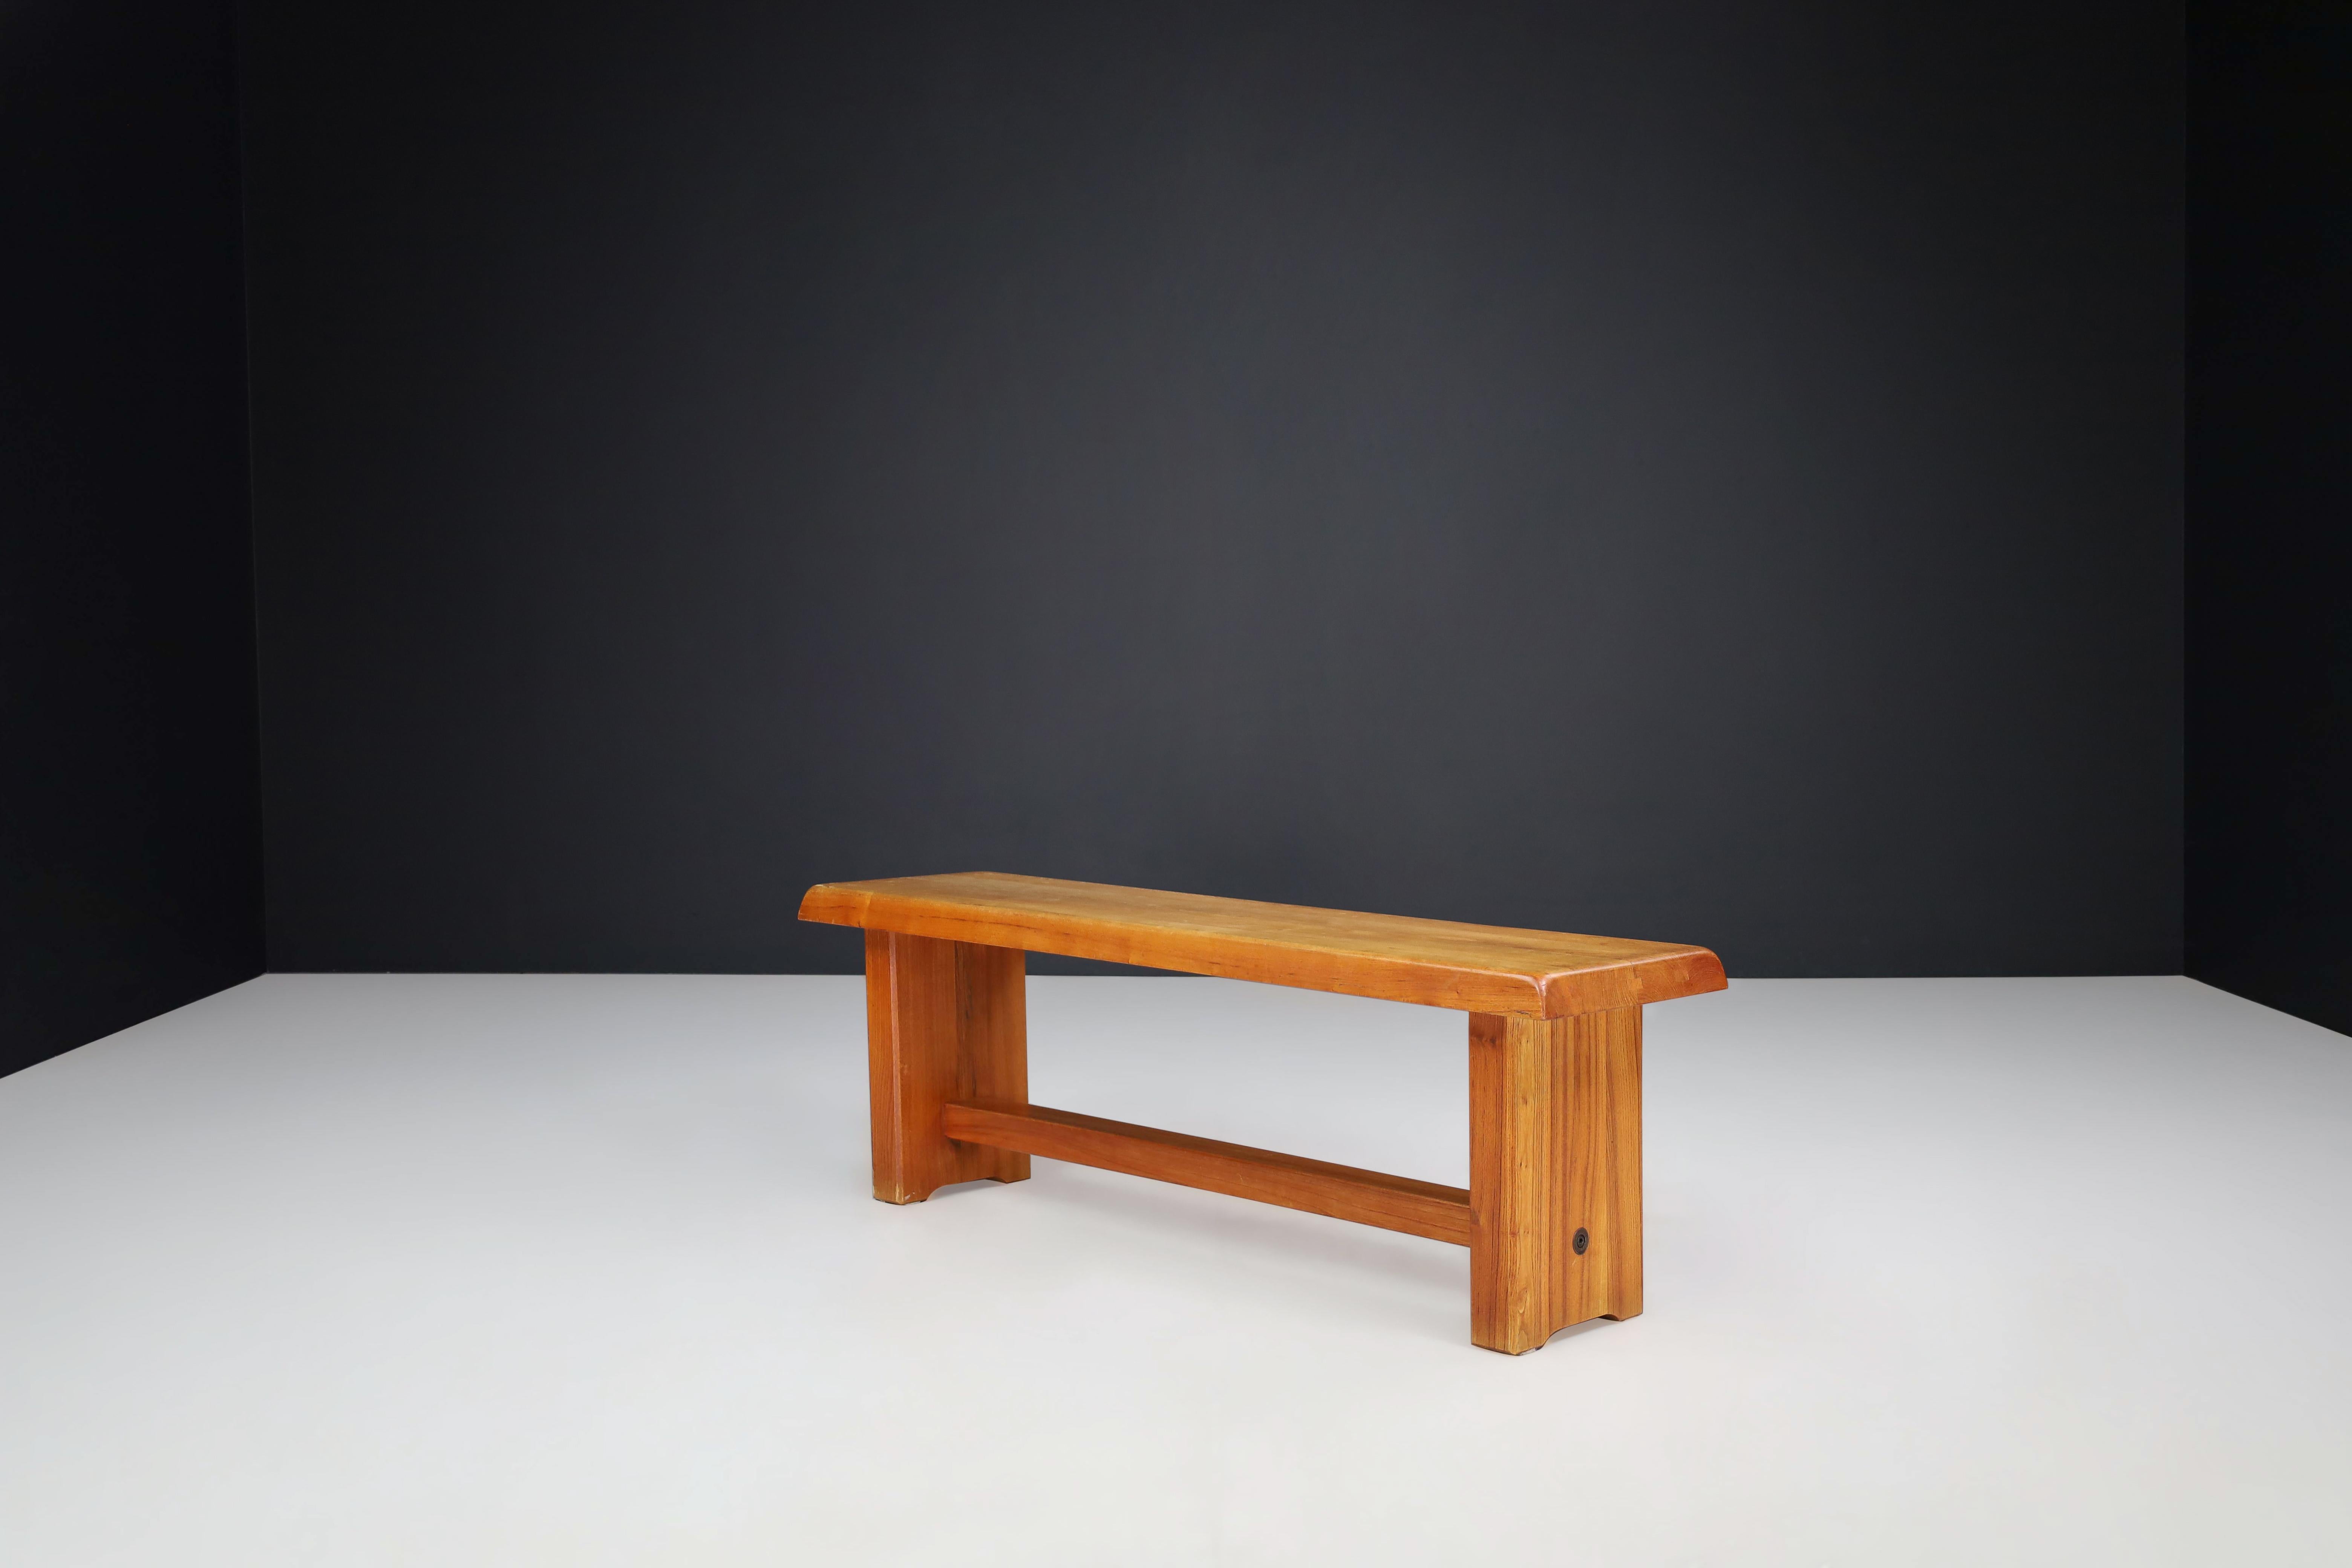 Pierre Chapo 'S 14 A' Elm Bench, France, 1970s

This solid rectangular bench in Elmwood, designed by Pierre Chapo, is called the S-14 model. It's a beautiful piece of furniture, made of solid elmwood, and has a rectangular seating top with sloping